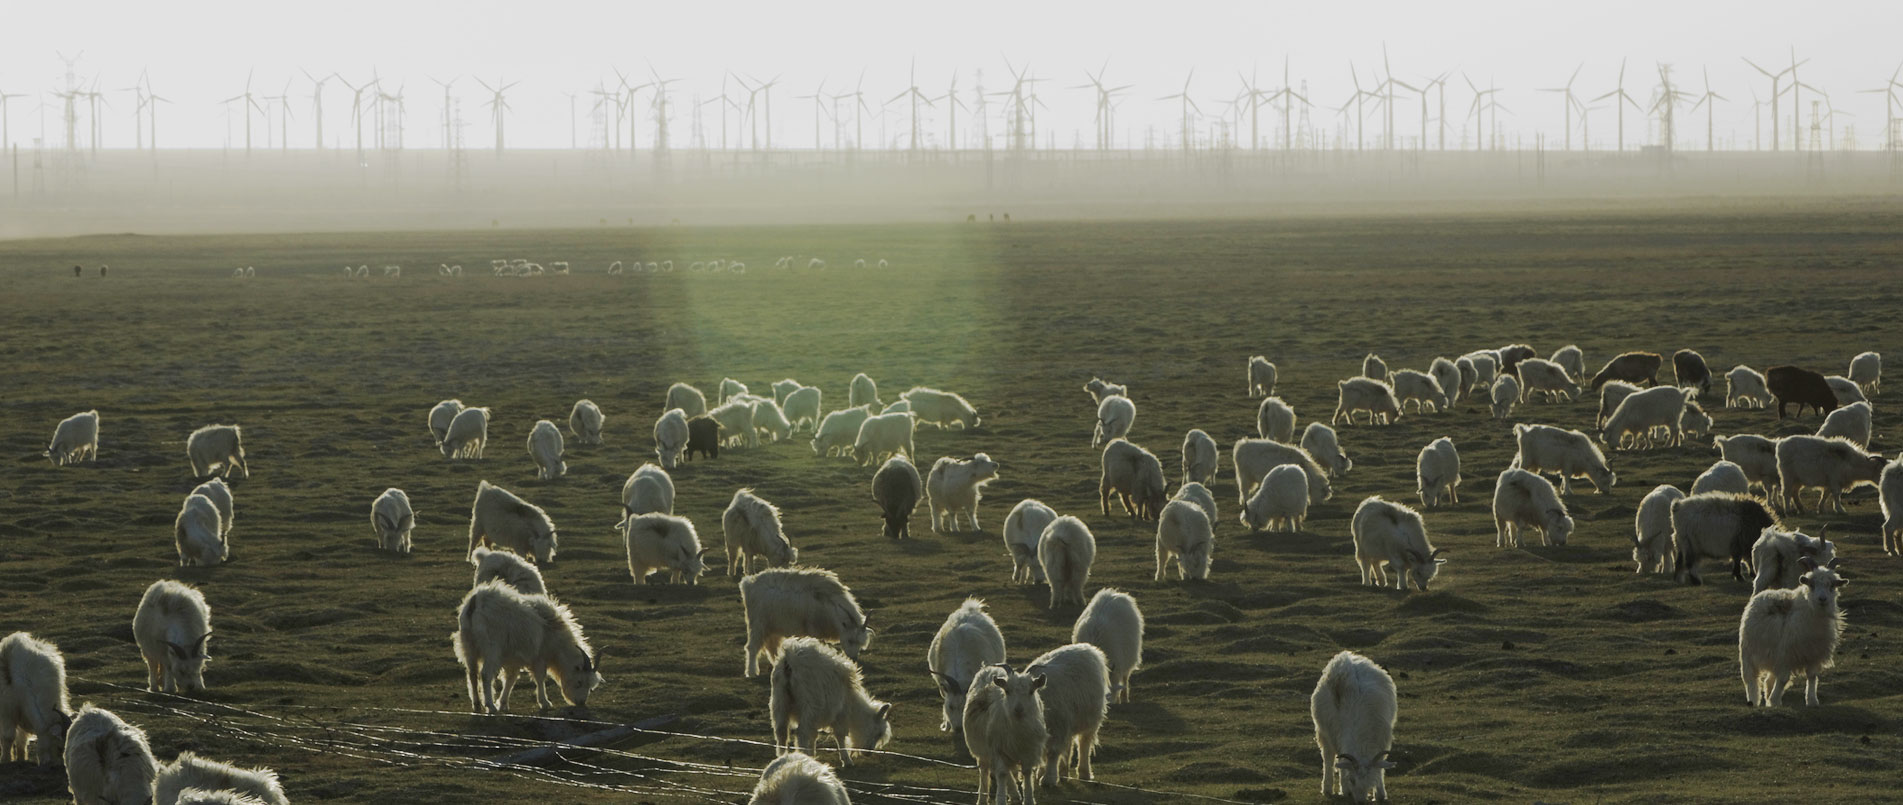 sheep in a filed. Wind farm as a backdrop